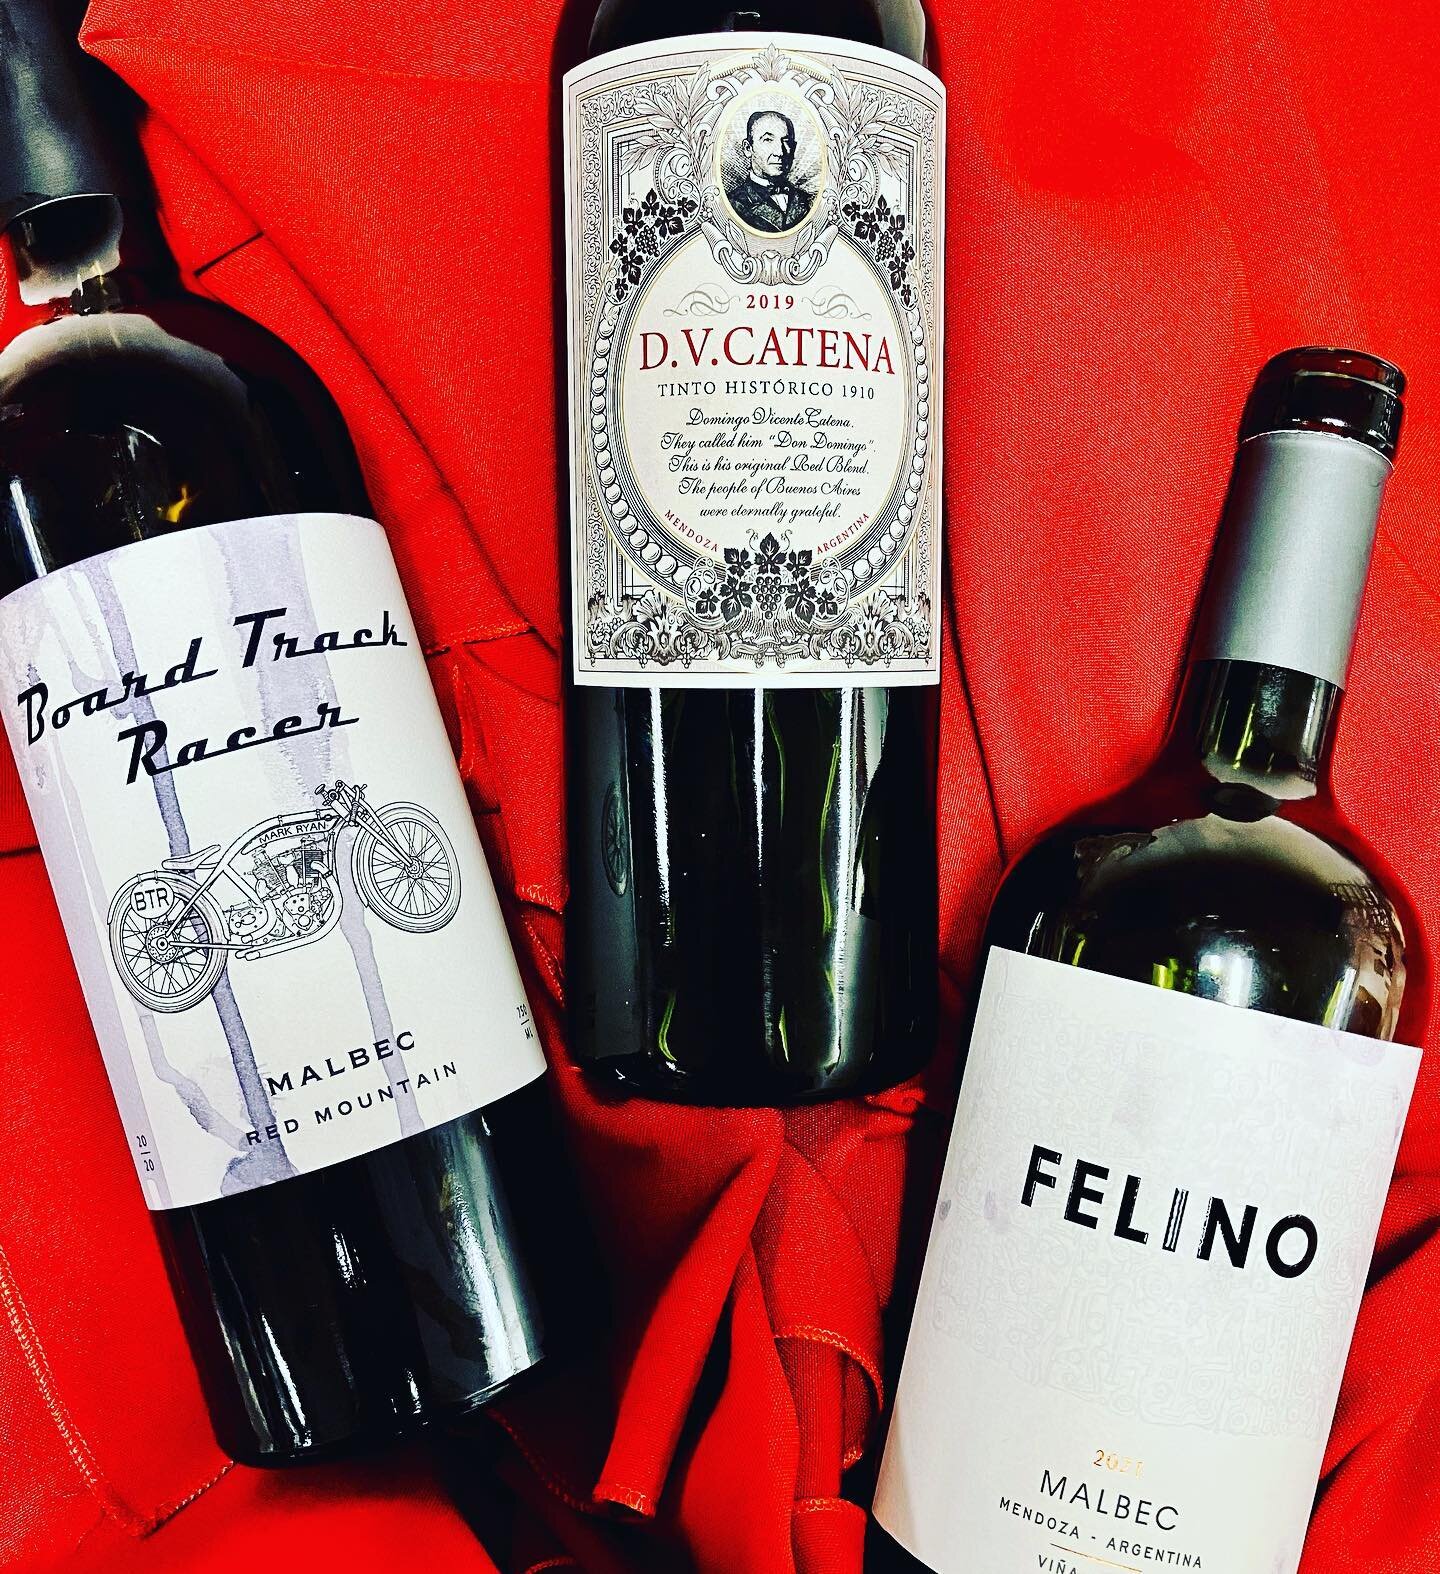 Happy Malbec World Day! I put together a small tasting to honor this under appreciated grape with some outstanding producers. A big hit was the bold @vina.cobos Felino Malbec by Paul Hobbs which packed an espresso blueberry bite. The DV Catena Tinto 